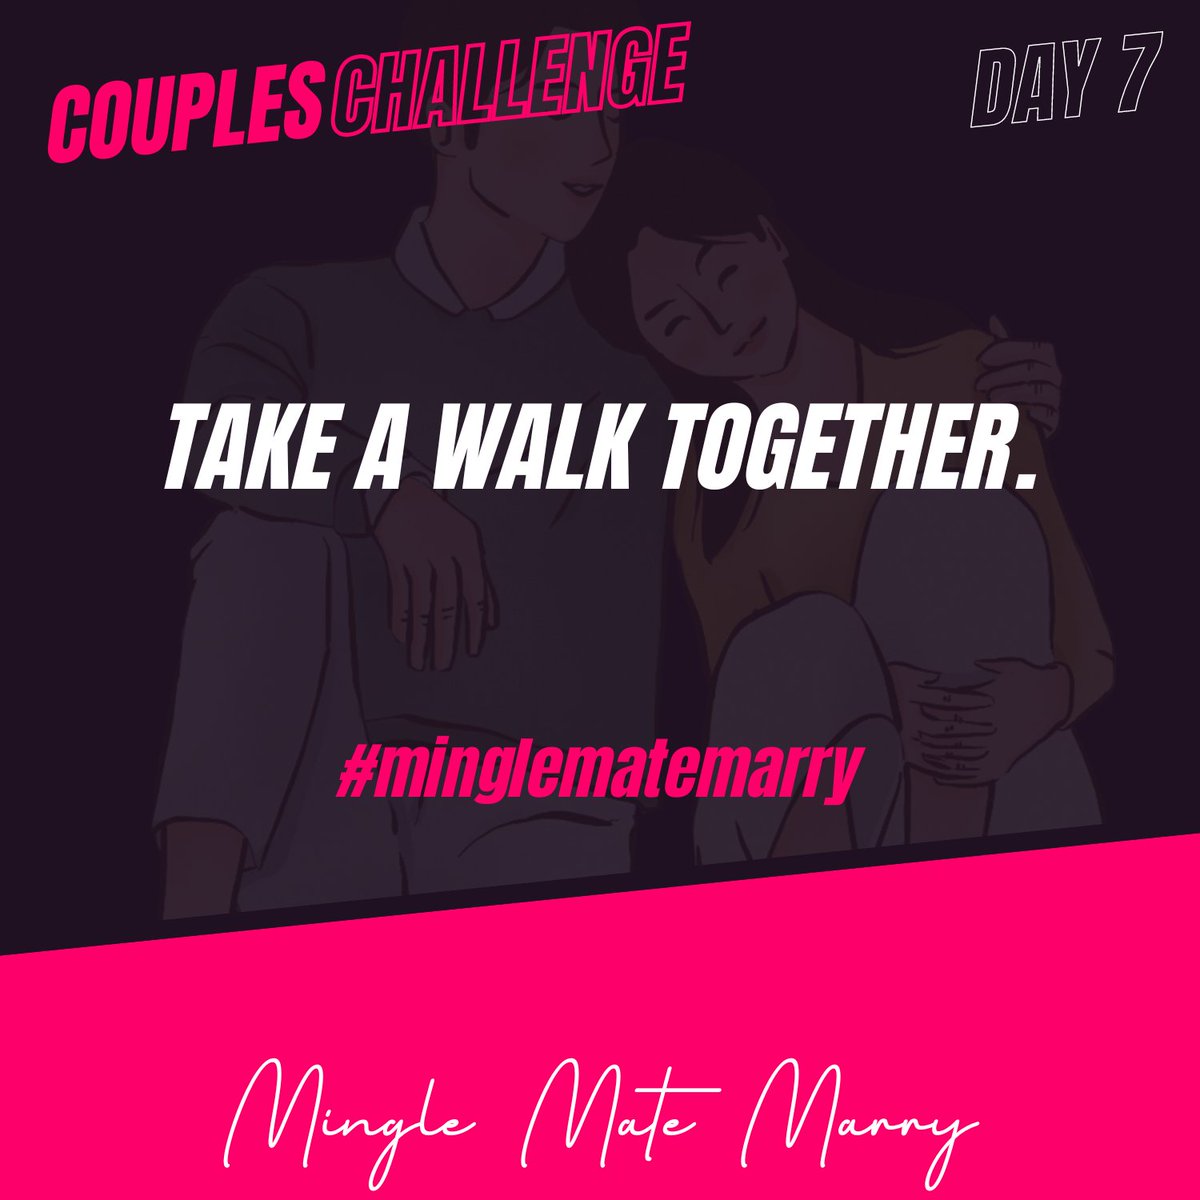 Welcome to Day 6 of Couples Challenge Month.

Take a Walk Together.

#marriage #marriagehumor #marriageworks #marriagetips #marriagegoals #marriageadvice #marriedlife #couplesgoals #coupleschallenge